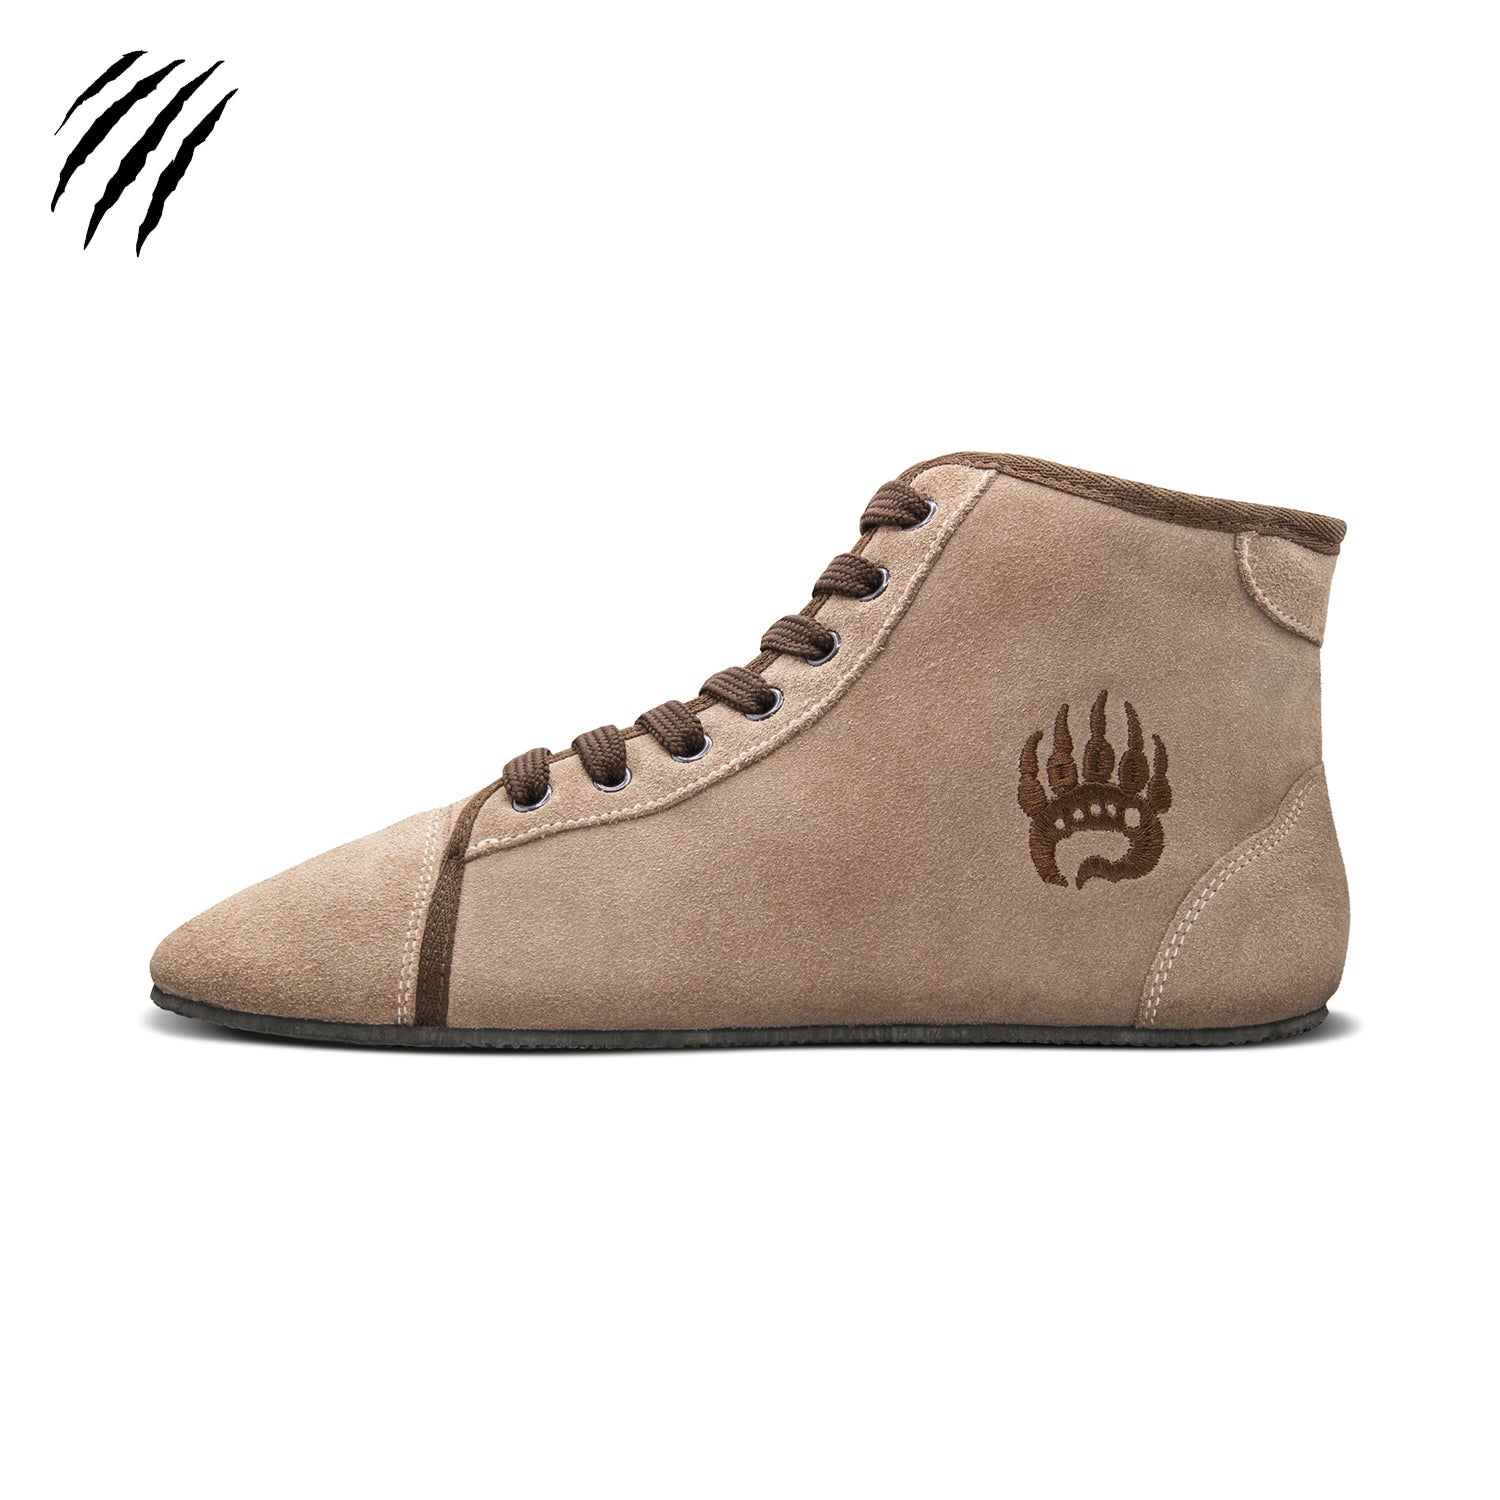 Single beige Bearfoot Badland Blemished High-Top boxing shoe with lace-up detail and a brown logo on the side. The shoe is isolated on a white background.